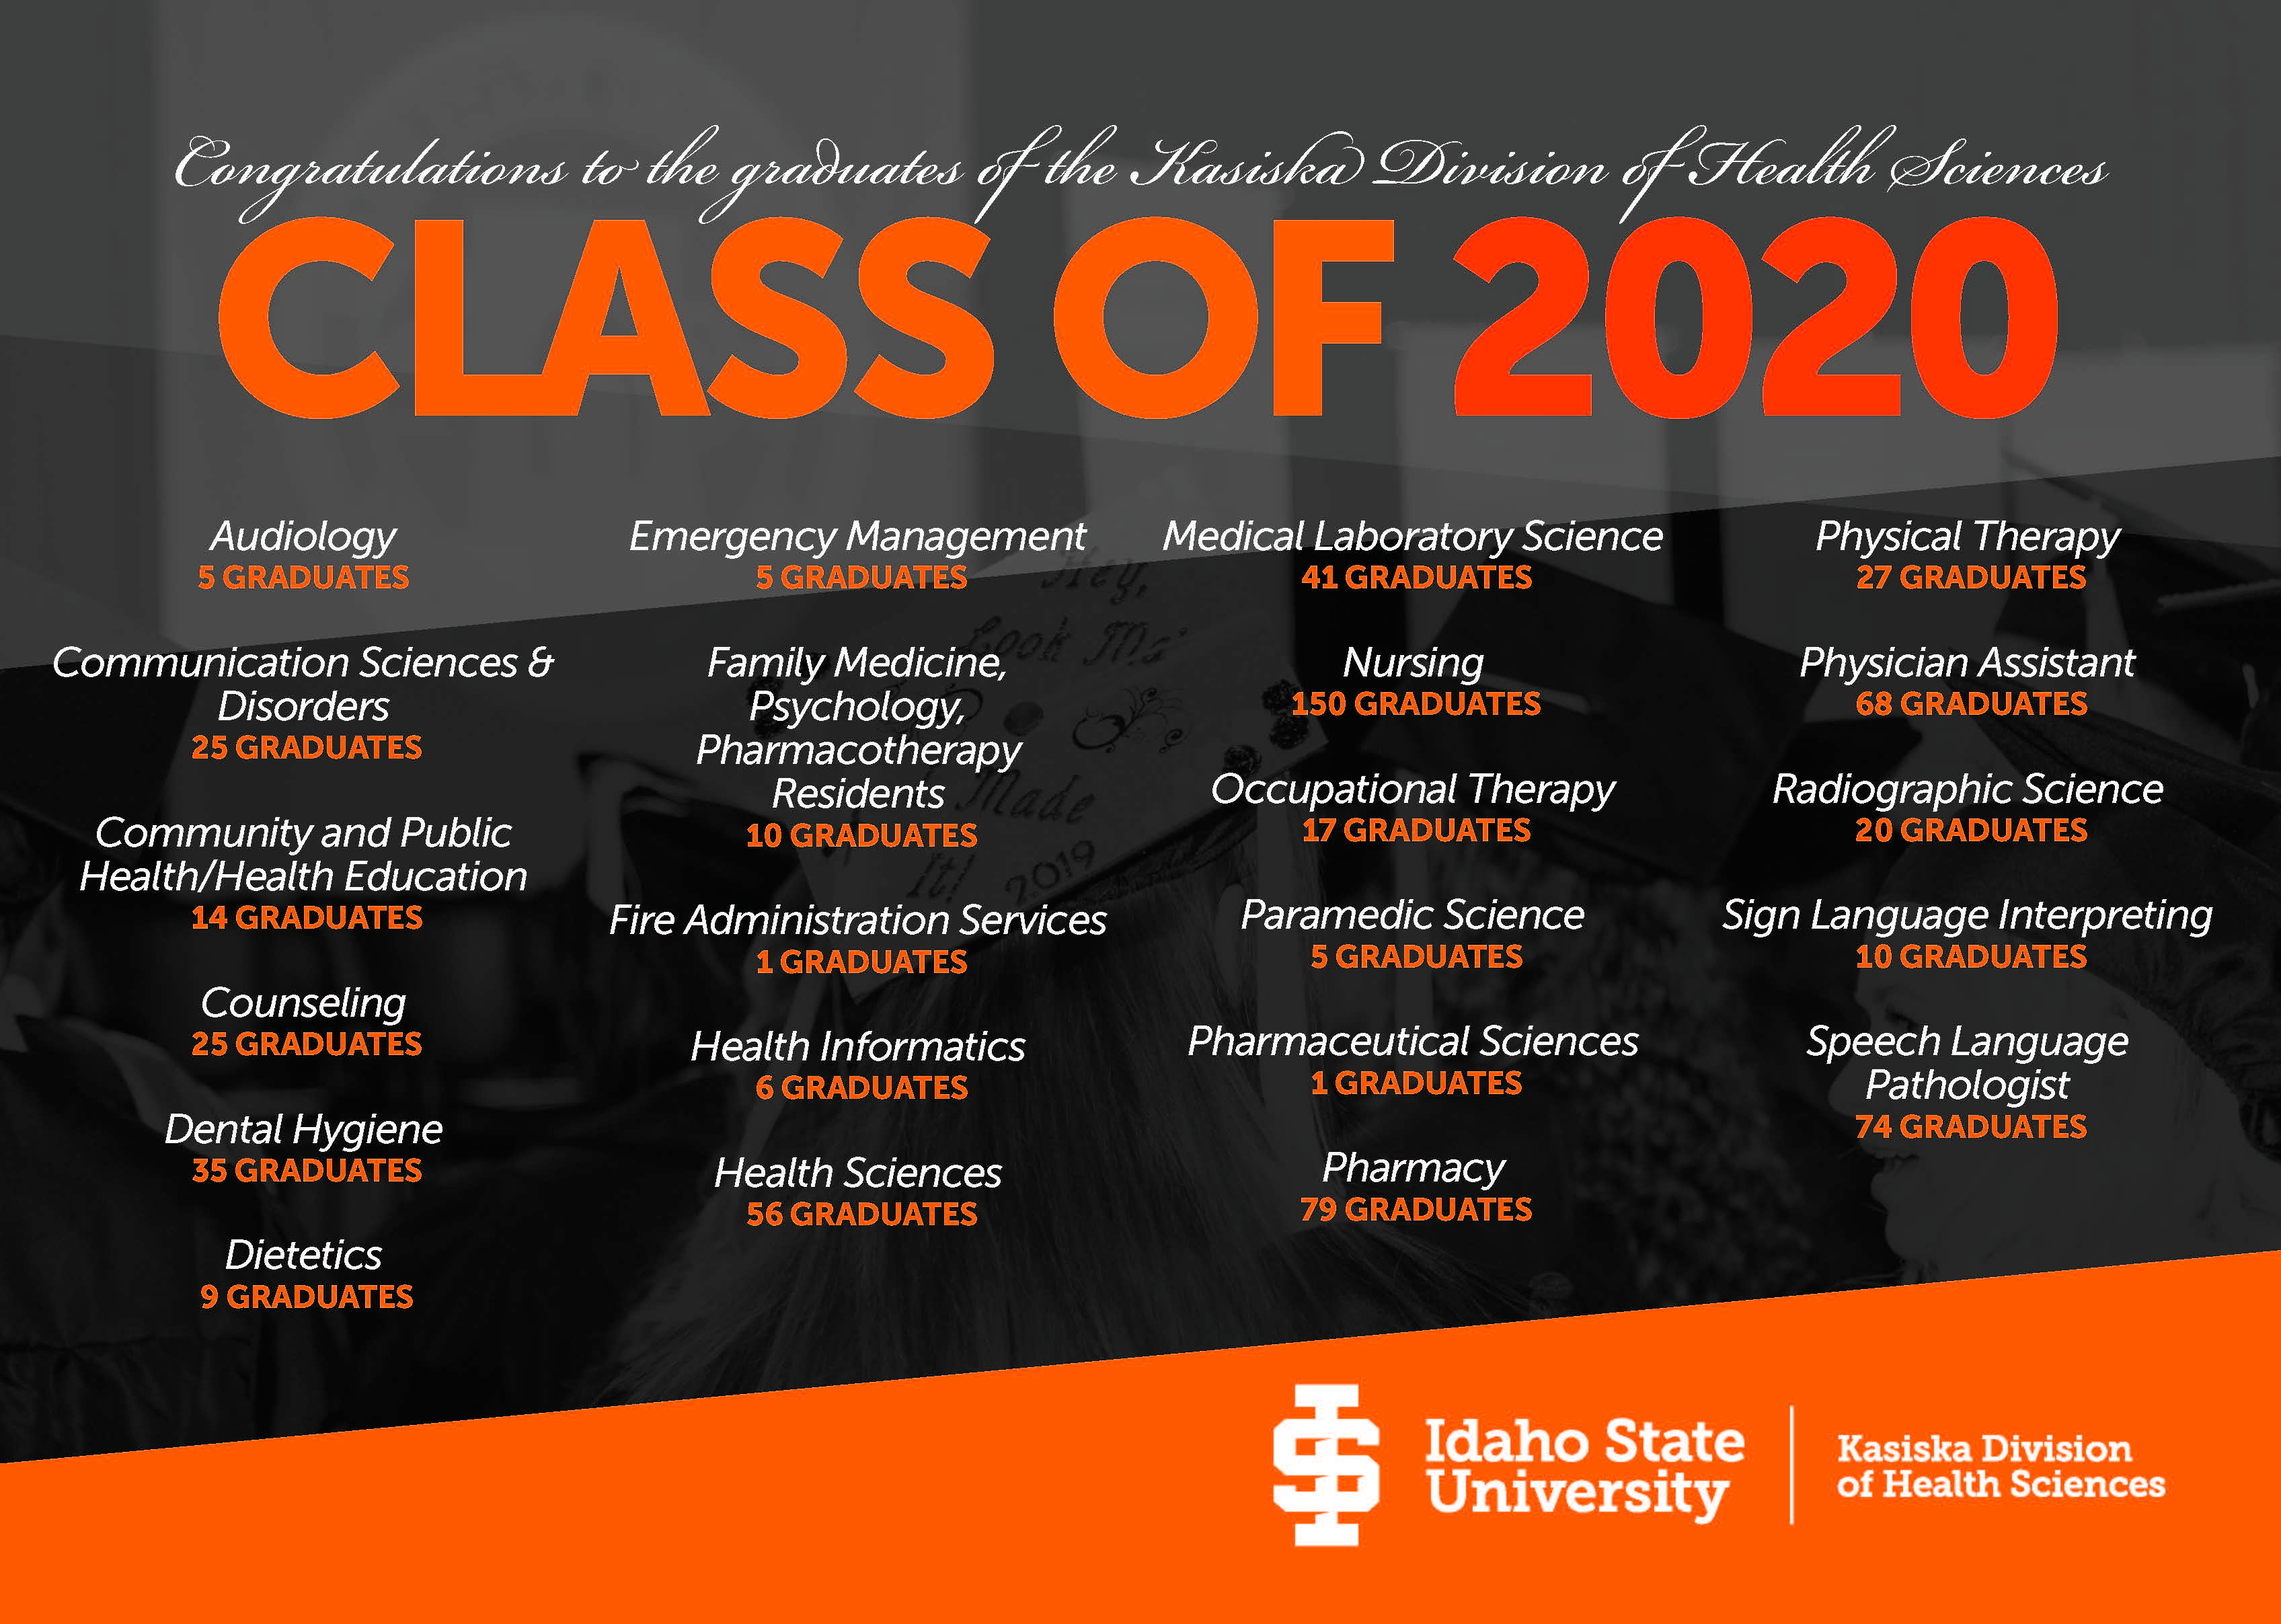 Congratulations Class of 2020 Aud -5  Comm Sci & Disorders – 25 Comm Public Health/Health Ed – 14 Counseling – 25 Dent Hygiene – 35 Dietetics – 9 Emergency Man– 5 Family Med/Psych/Pharm Residents - 10 Fire Admin – 1 Health Info – 6 Health Sci – 56 Med Lab Sci – 41 Nursing – 150 Occ Therapy – 17 Paramedic – 5 Pharm Sci – 1 Pharm – 79 PT – 27 PA – 68 Radi Sci – 20 Sign Lang Int – 10 Speech Path – 74